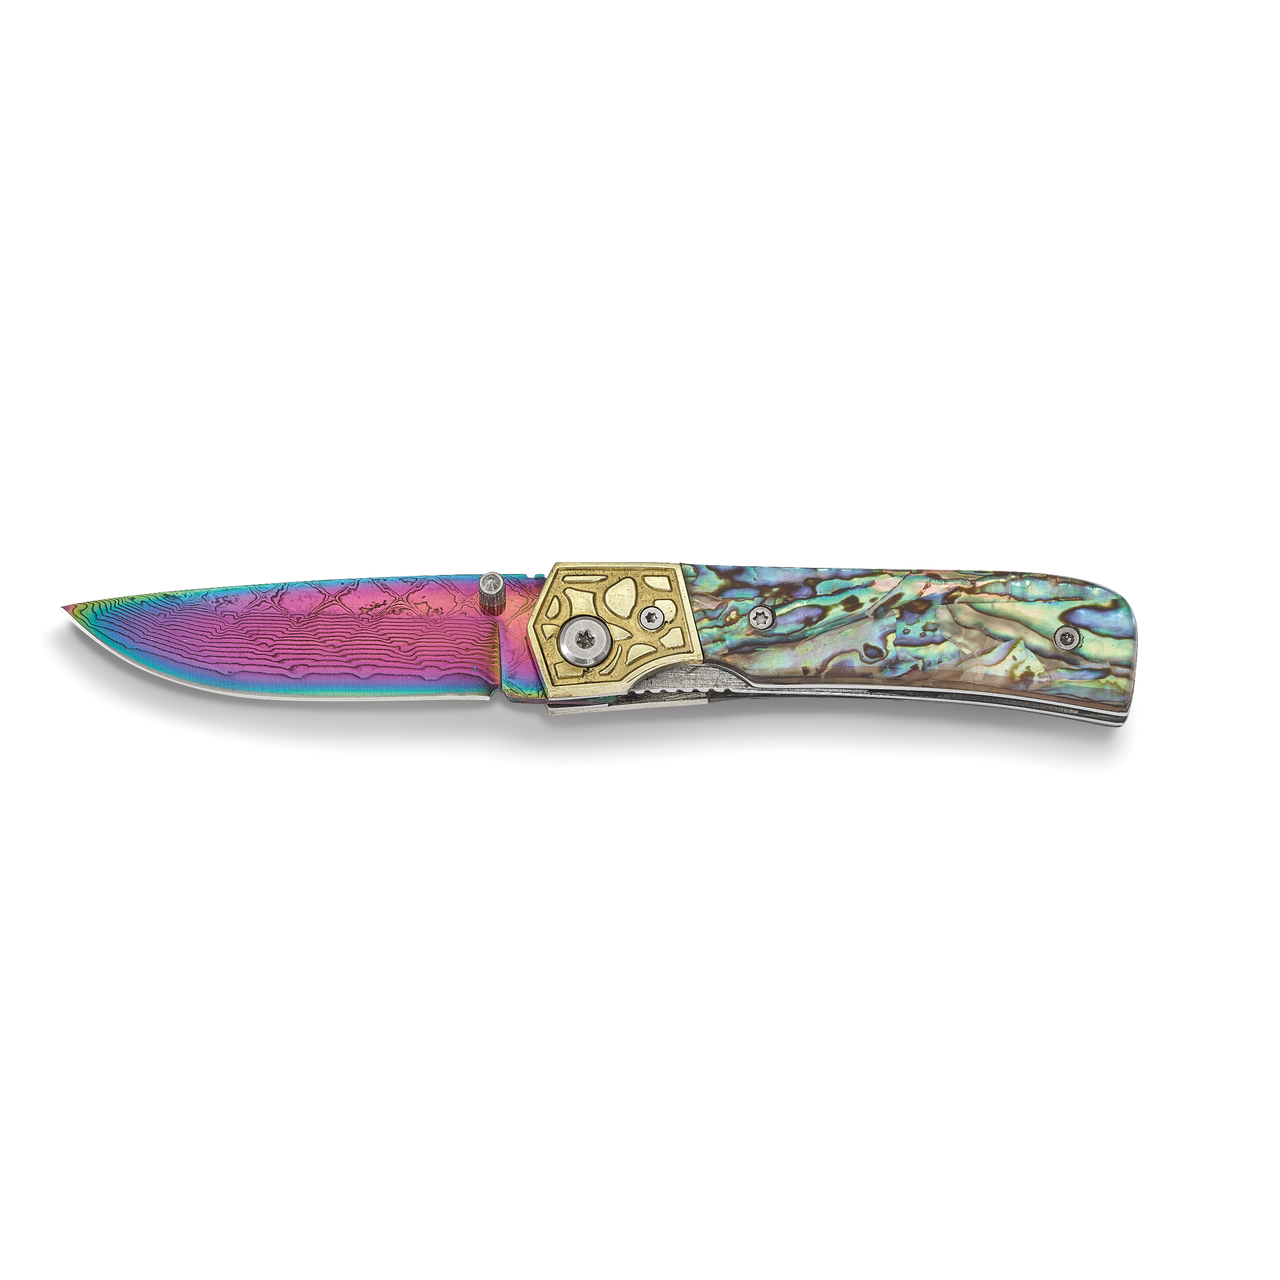 Genuine Abalone Shell Handle Knife Damascus Steel 256 Layer Folding Blade by Jere